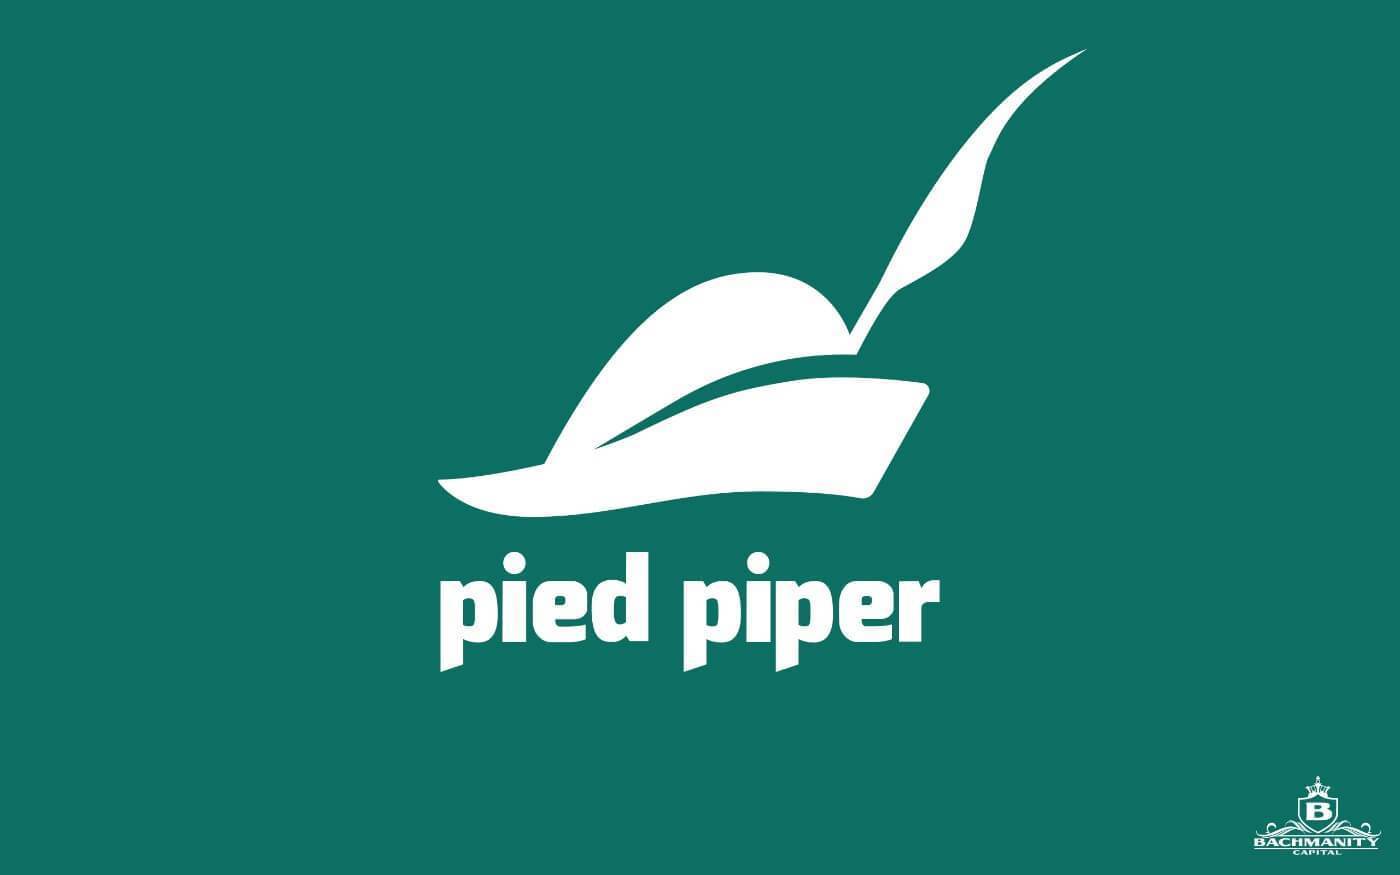 Piper Logo - Silicon Valley - Pied Piper Logo - Canvas Prints by Joel Jerry | Buy ...